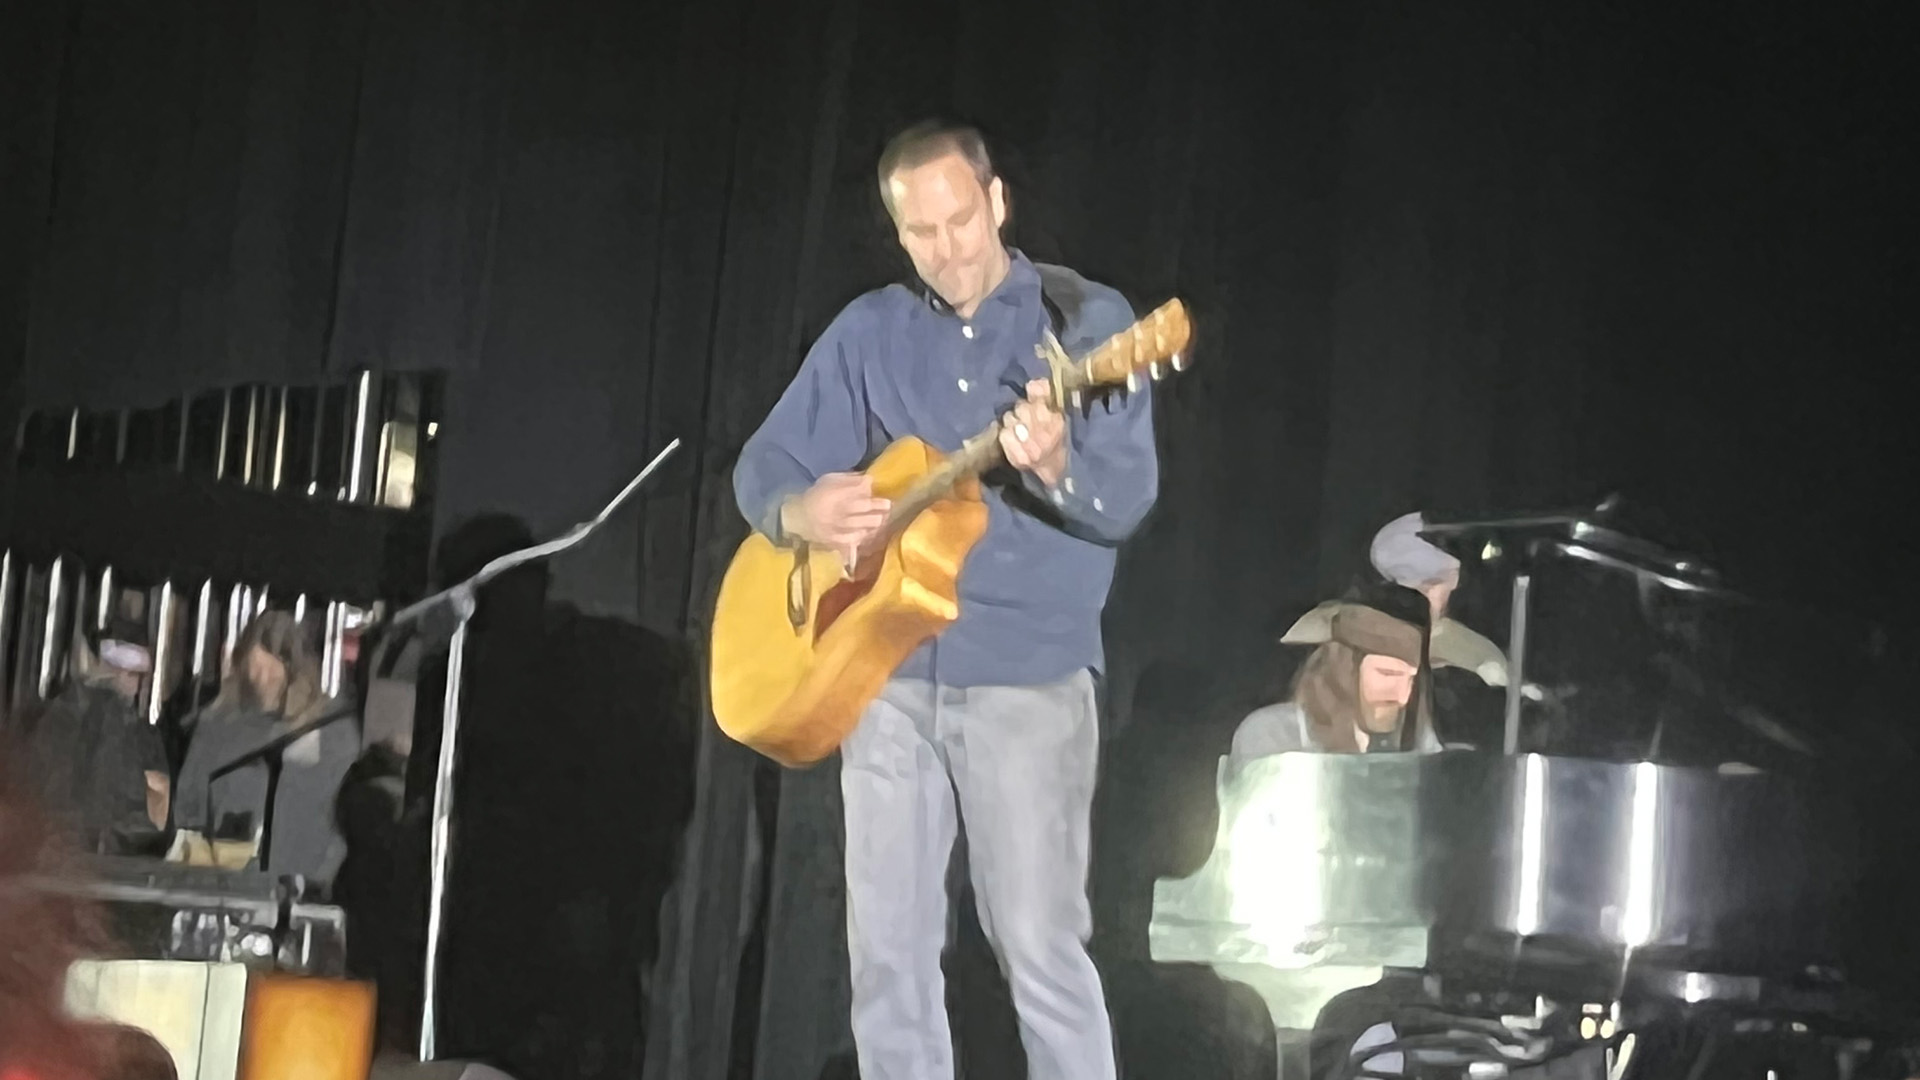 Jack Johnson playing guitar at the Ladero Theatre